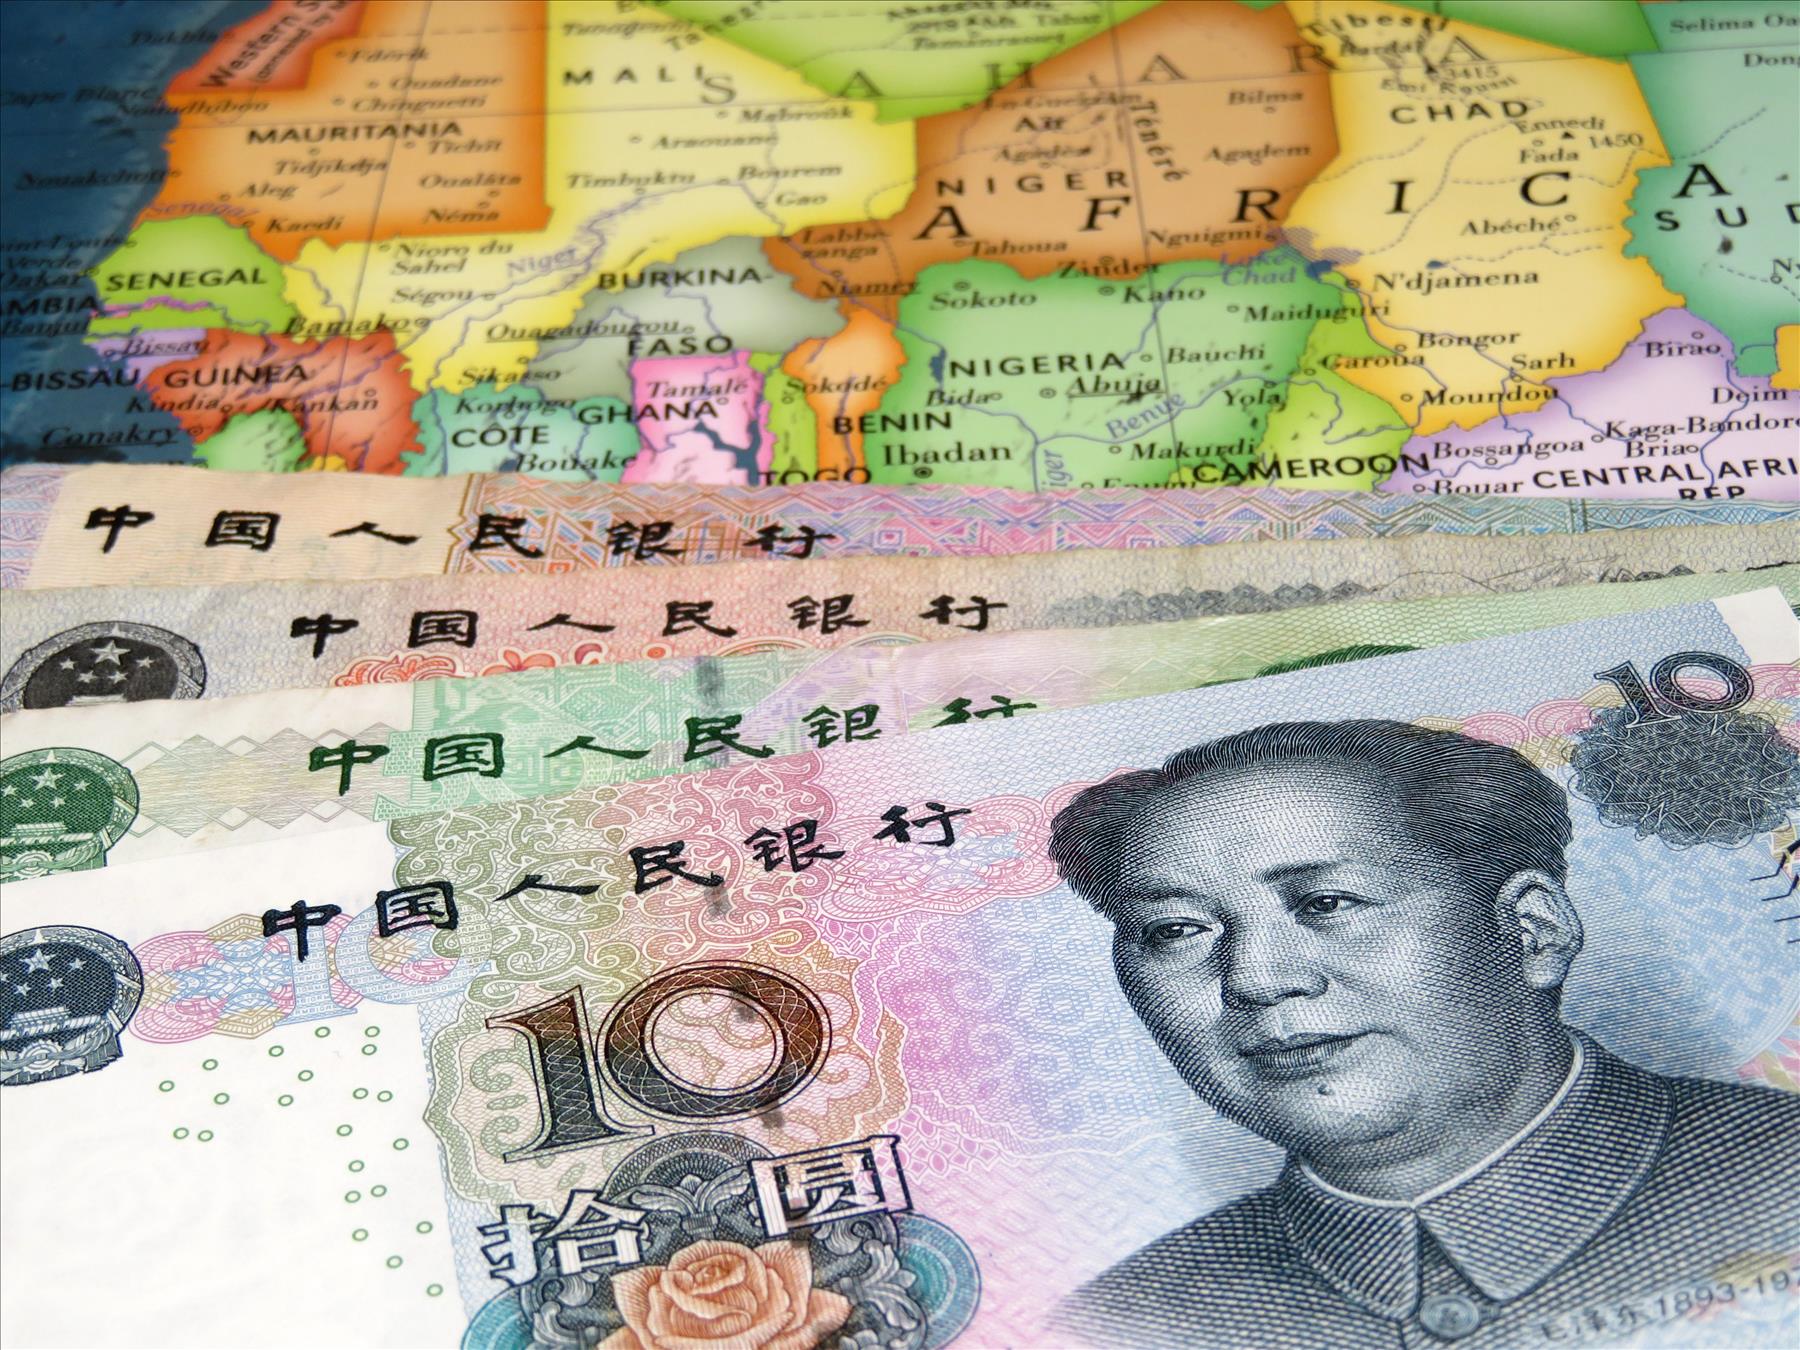 Africans should respond to Chinese racism with their pockets